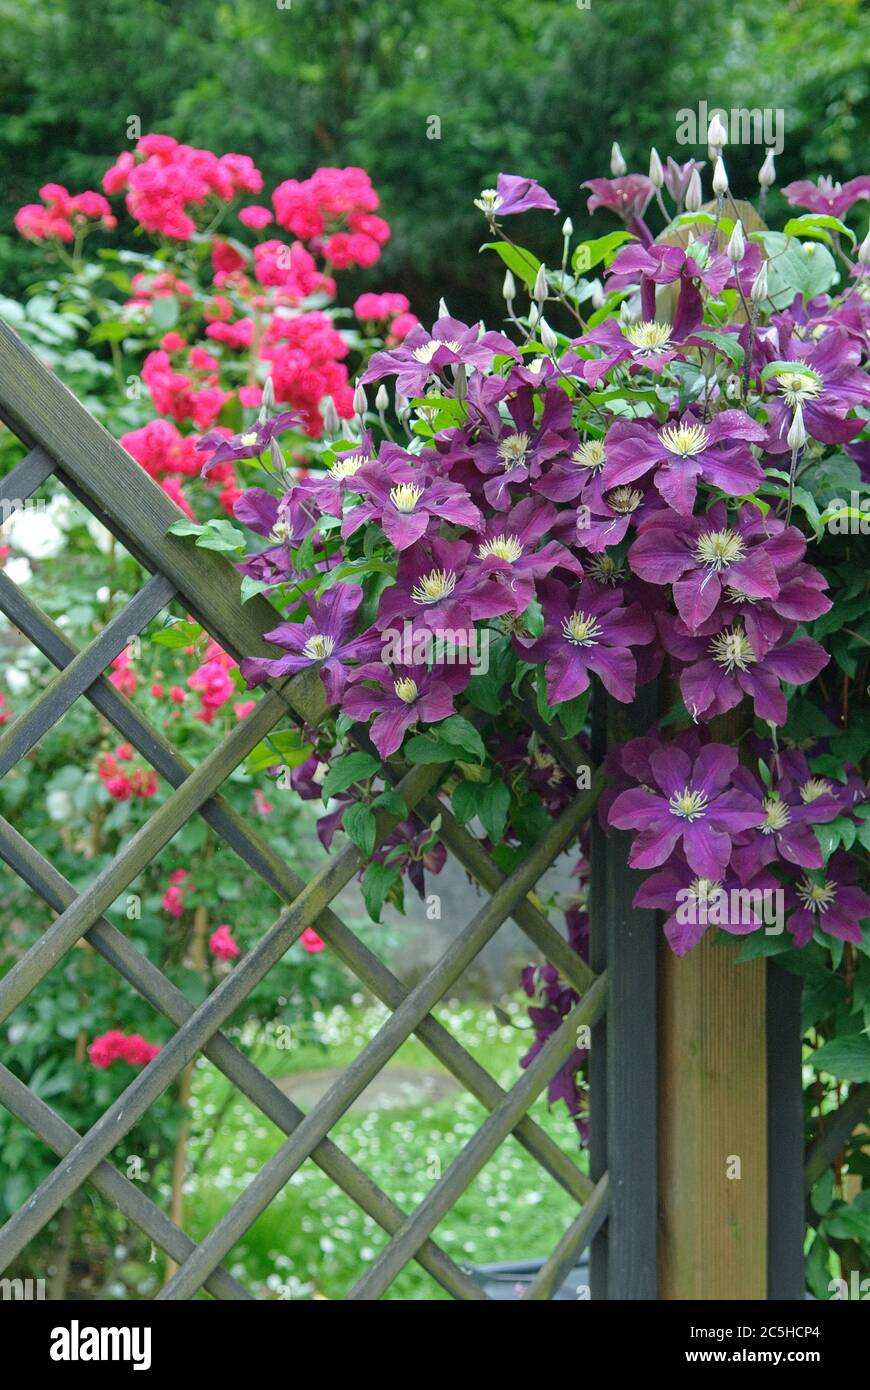 Grossblumige Waldrebe Clematis The Vagabond Stock Photo